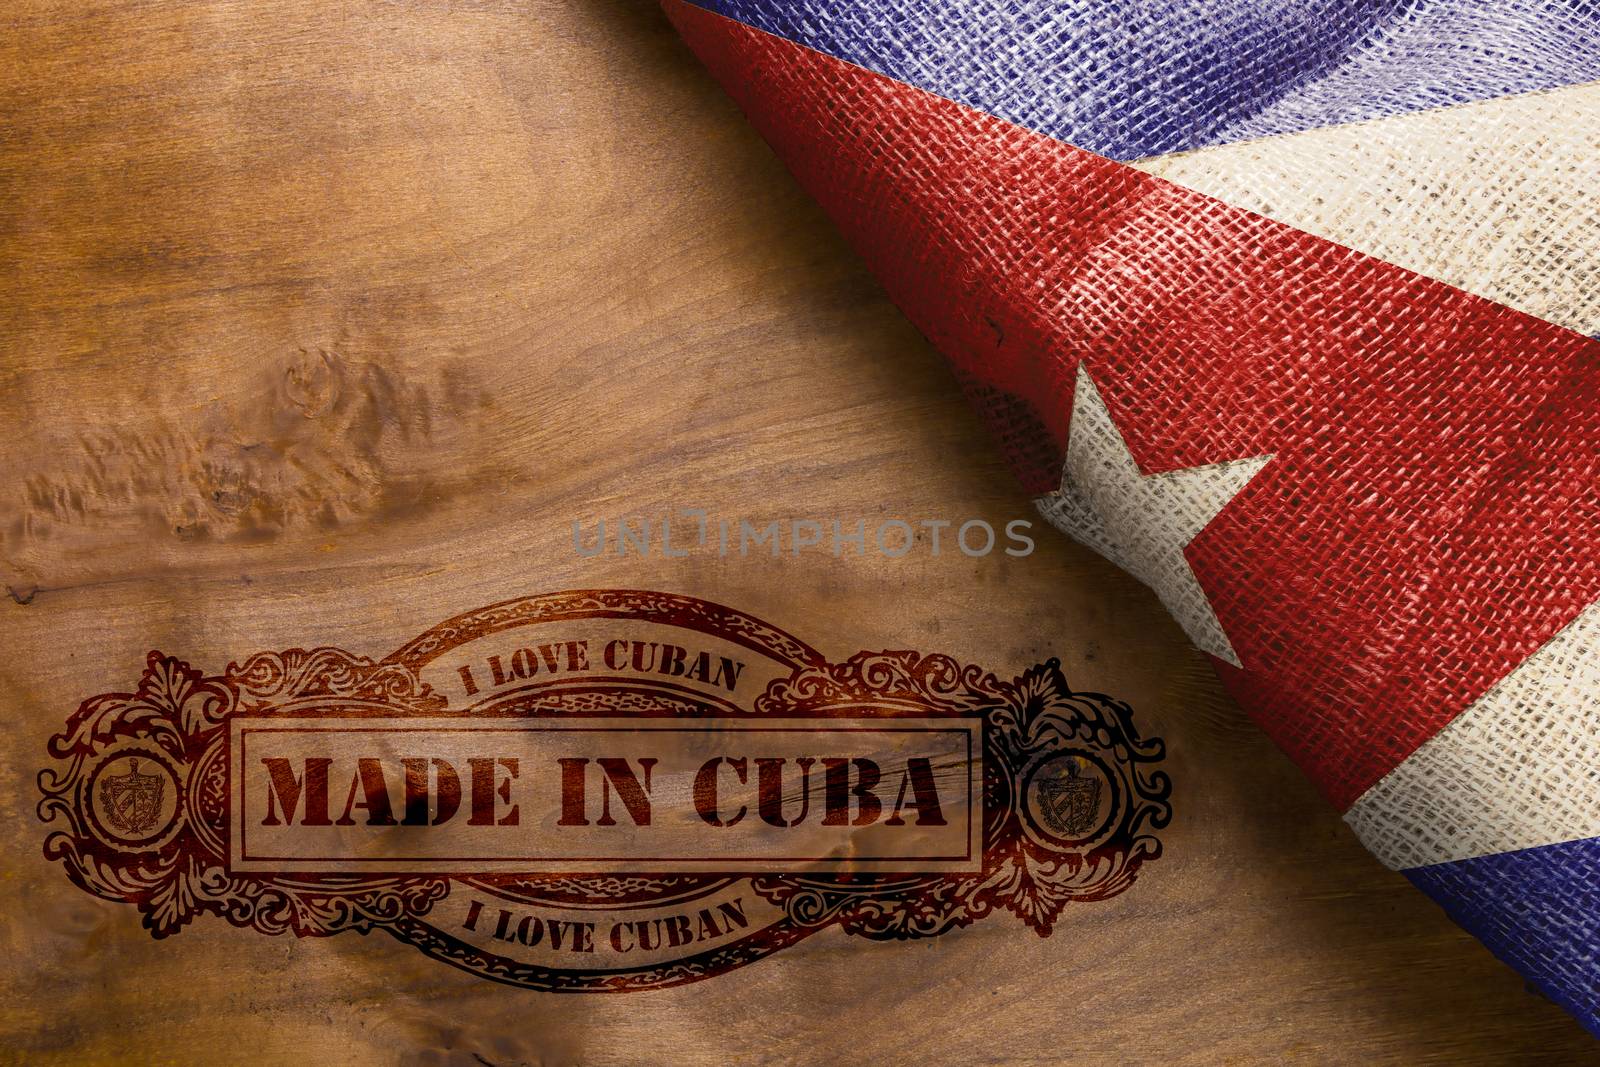 Vintage hot imprint on a wooden surface Made in Cuba.